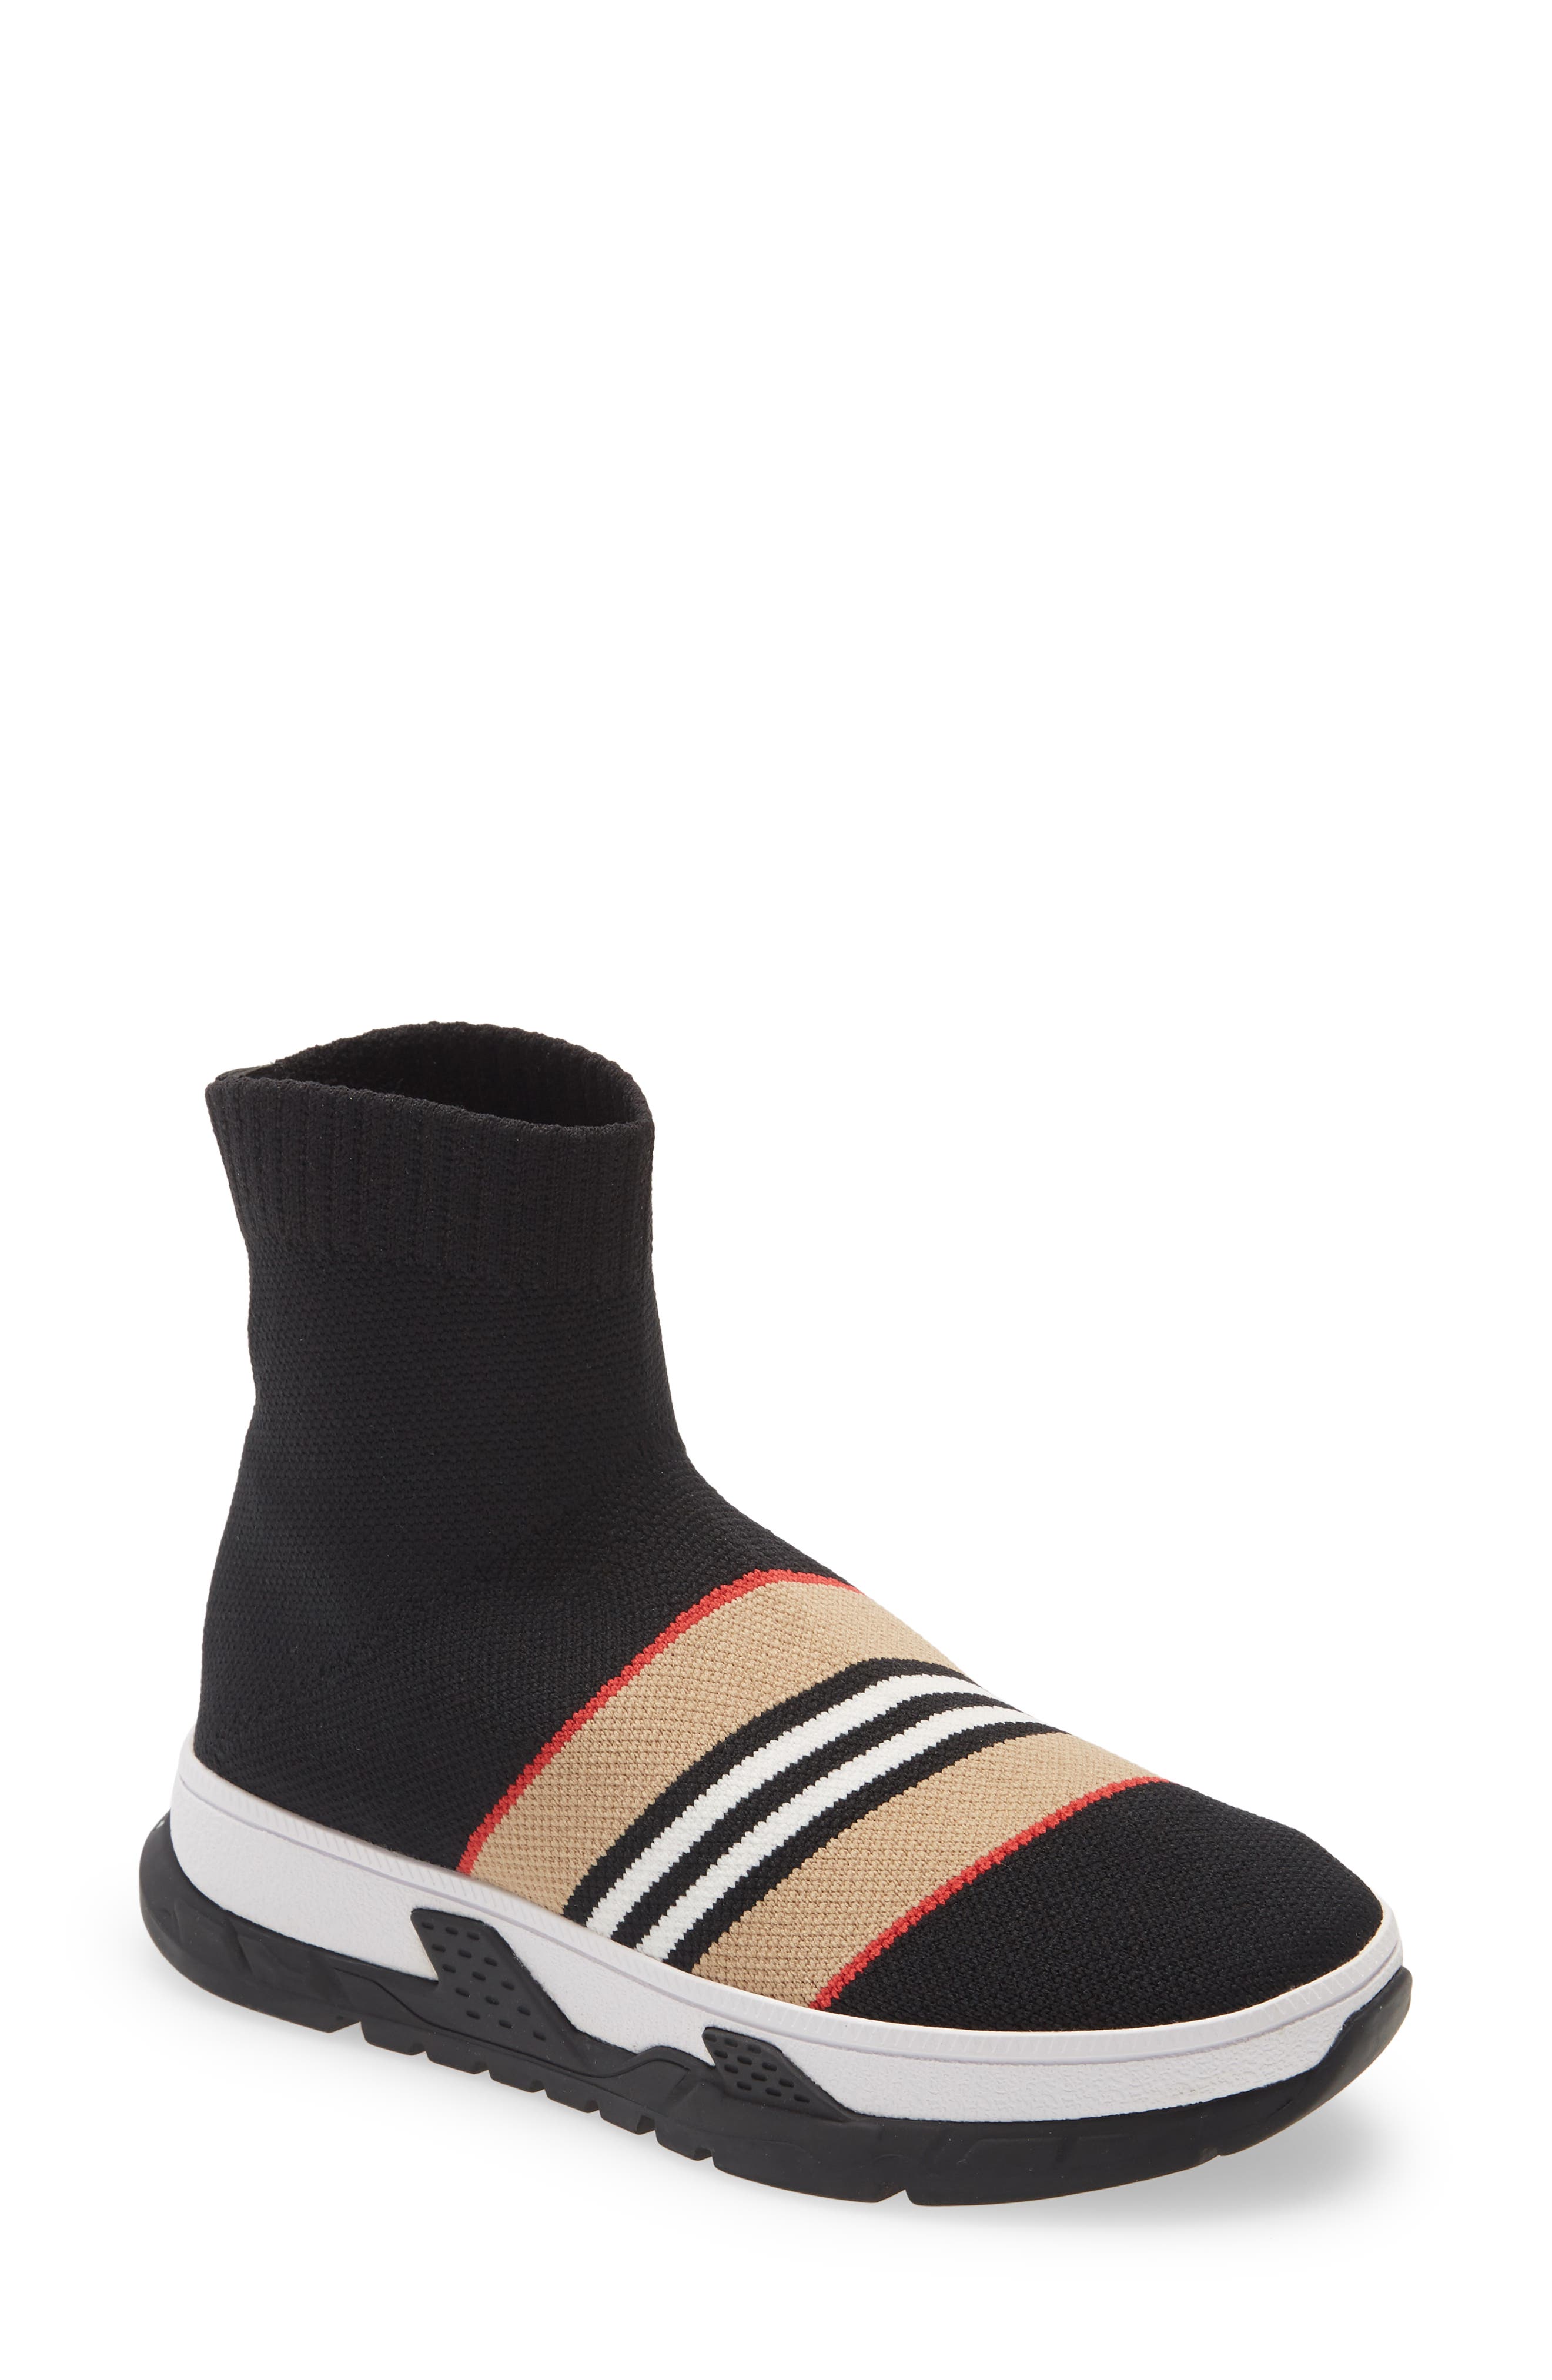 sock shoes for boys